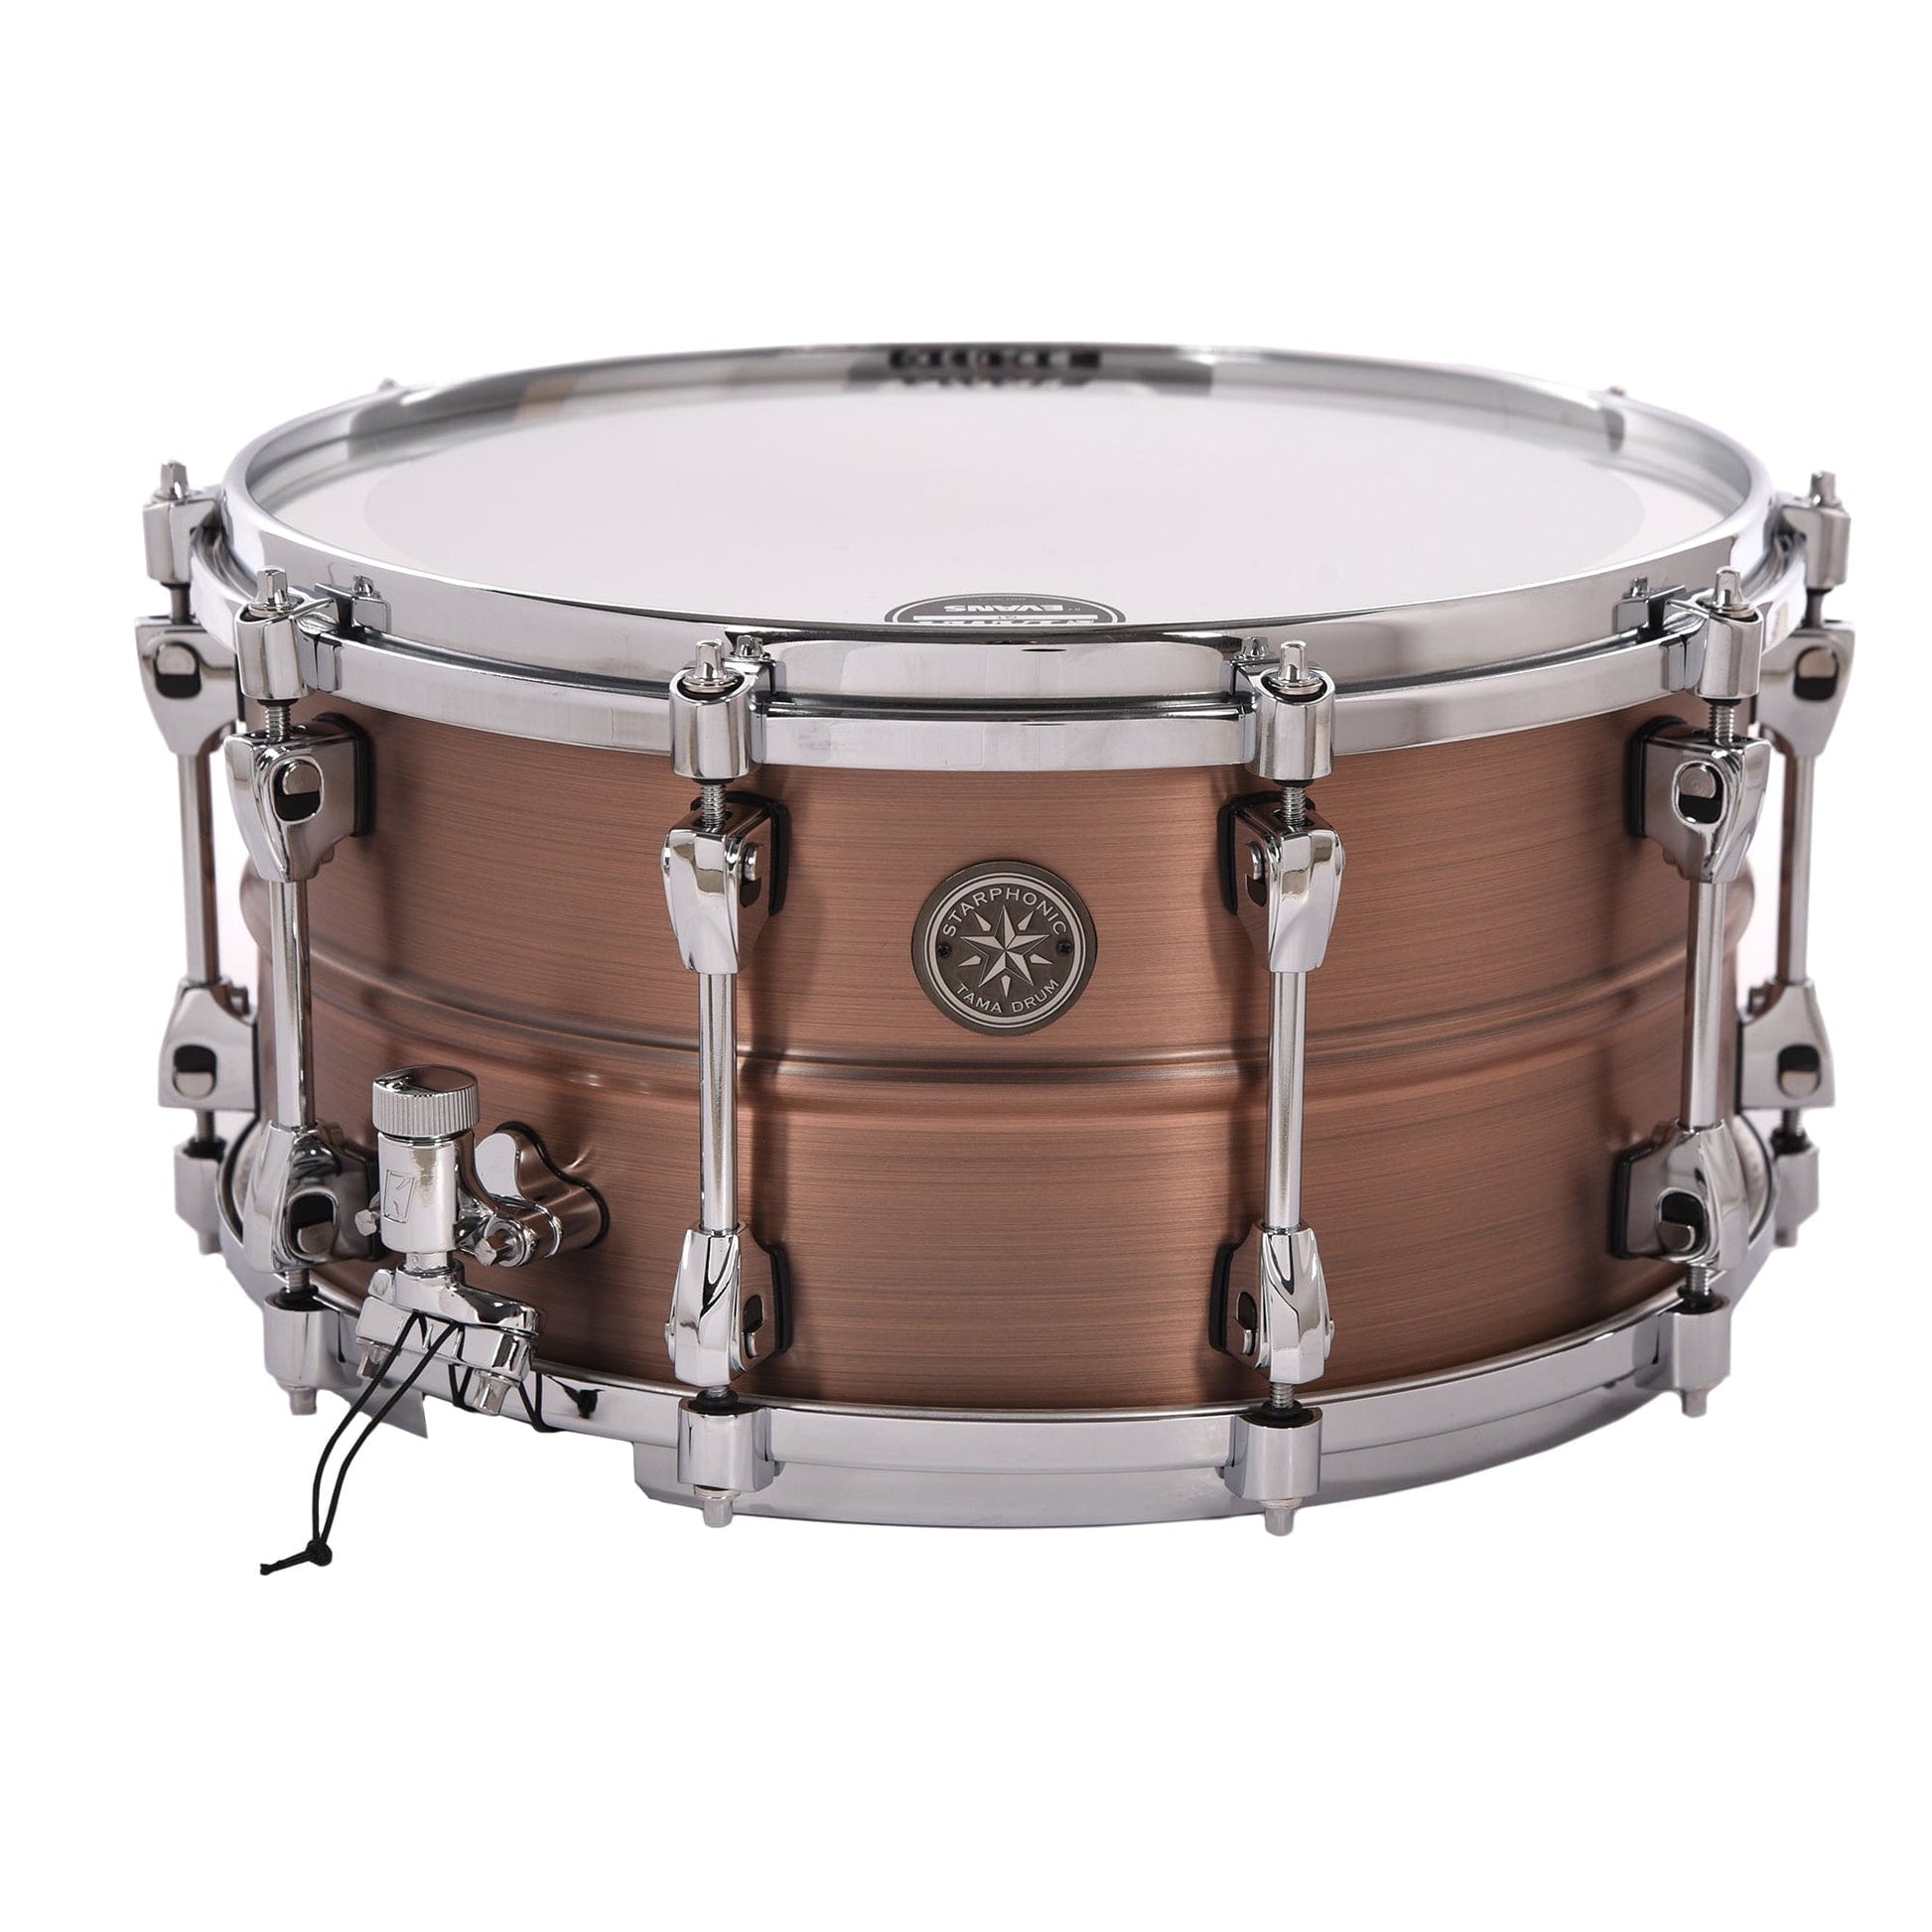 Tama 7x14 Starphonic Copper Snare Drum Drums and Percussion / Acoustic Drums / Snare